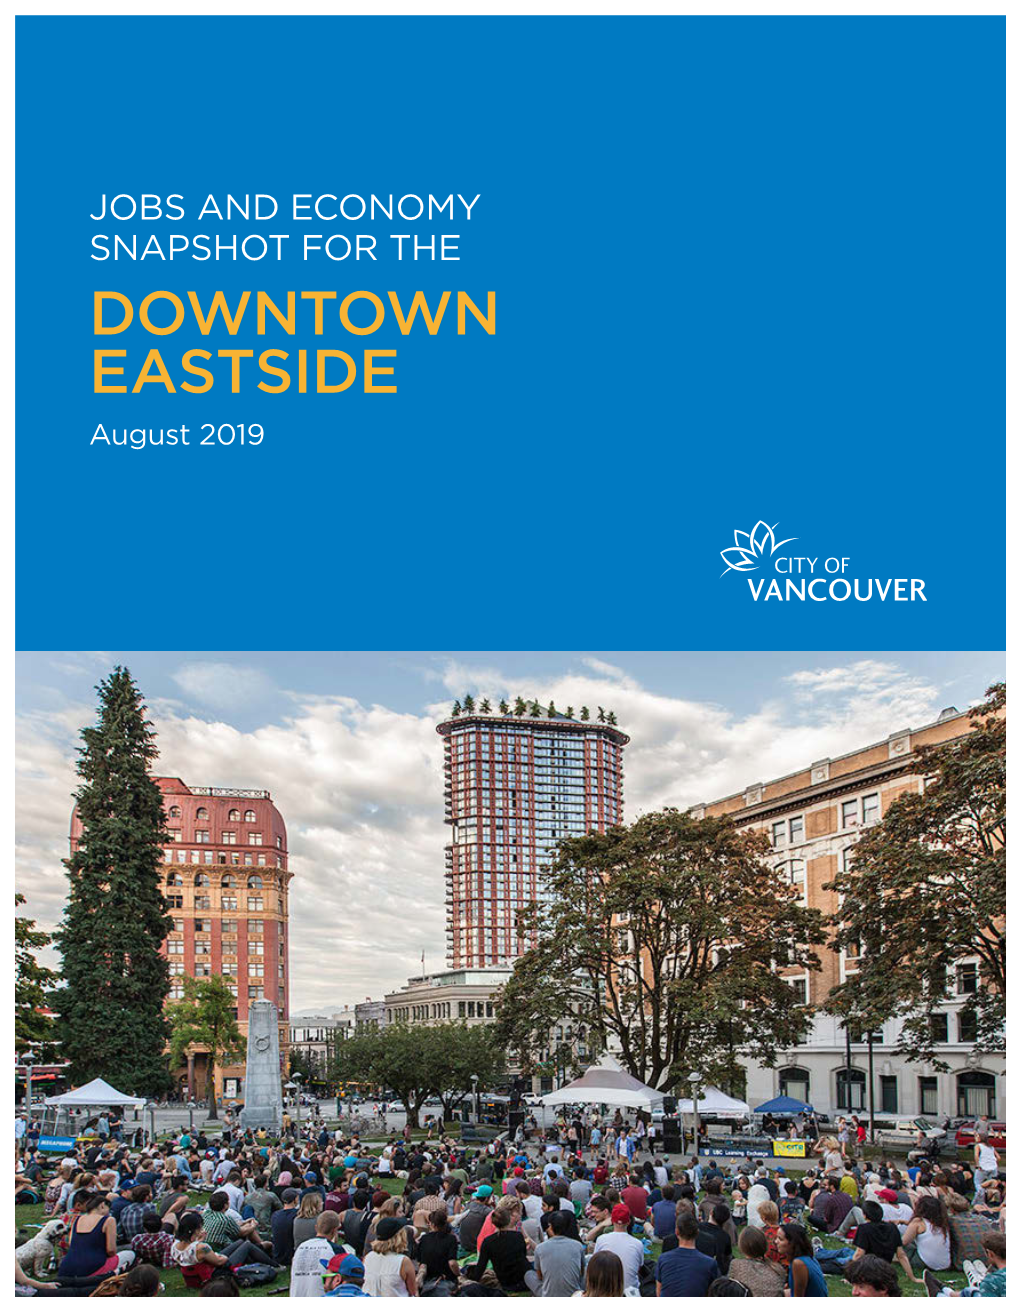 Downtown Eastside (DTES) Hobs and Economy Snapshot